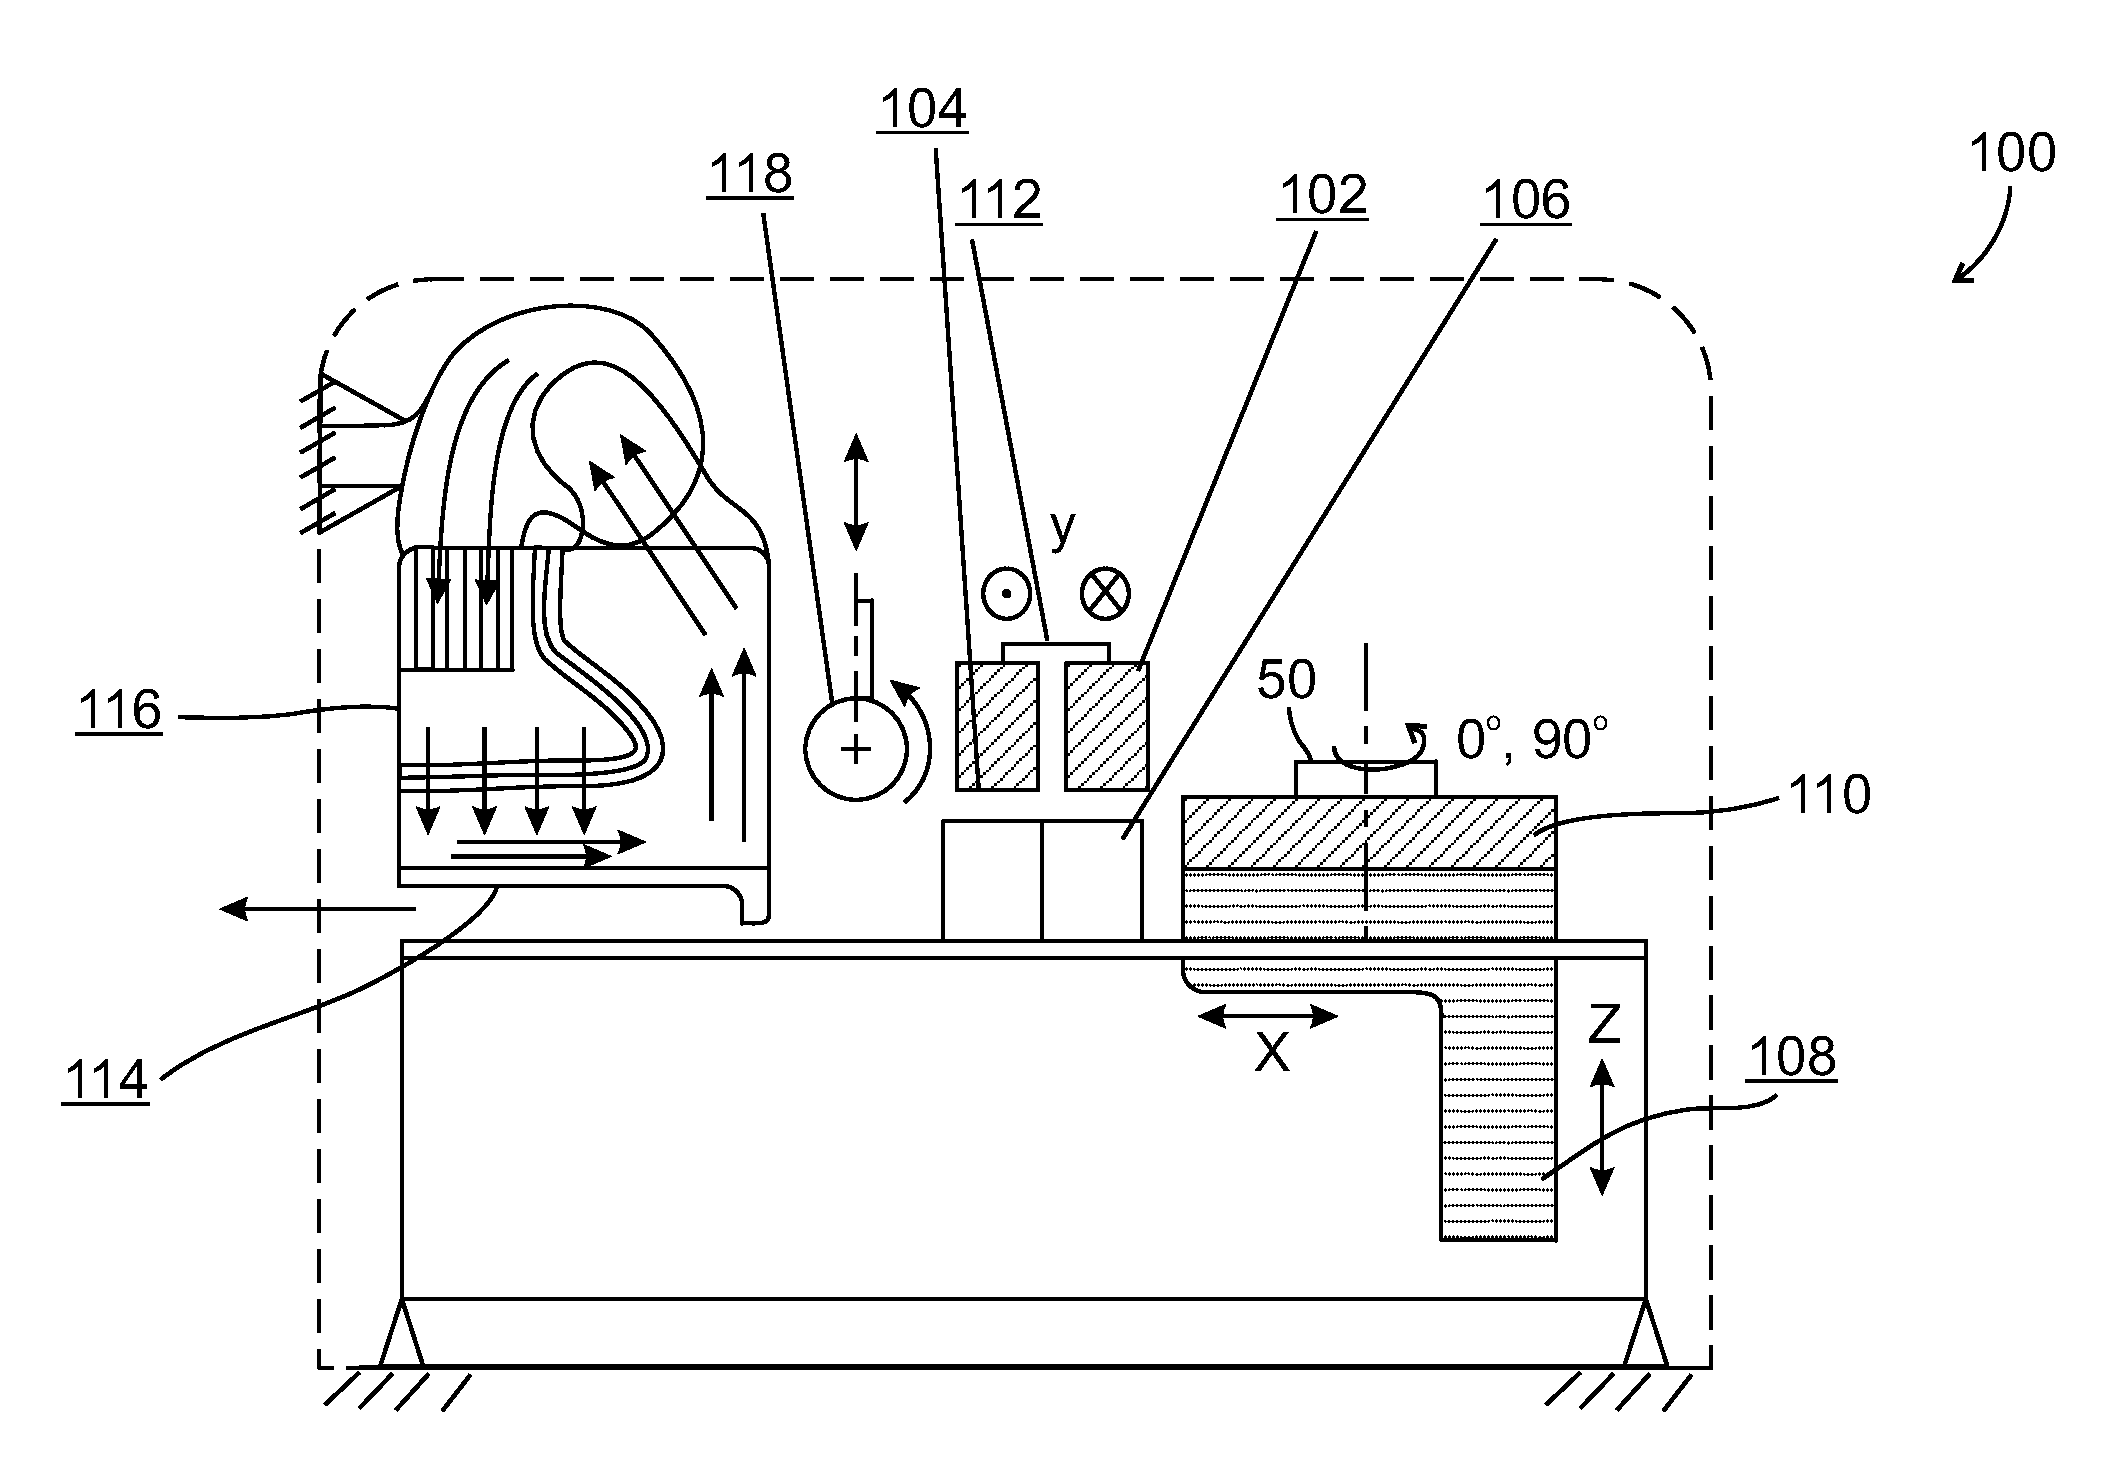 System and method for direct inkjet printing of 3D objects